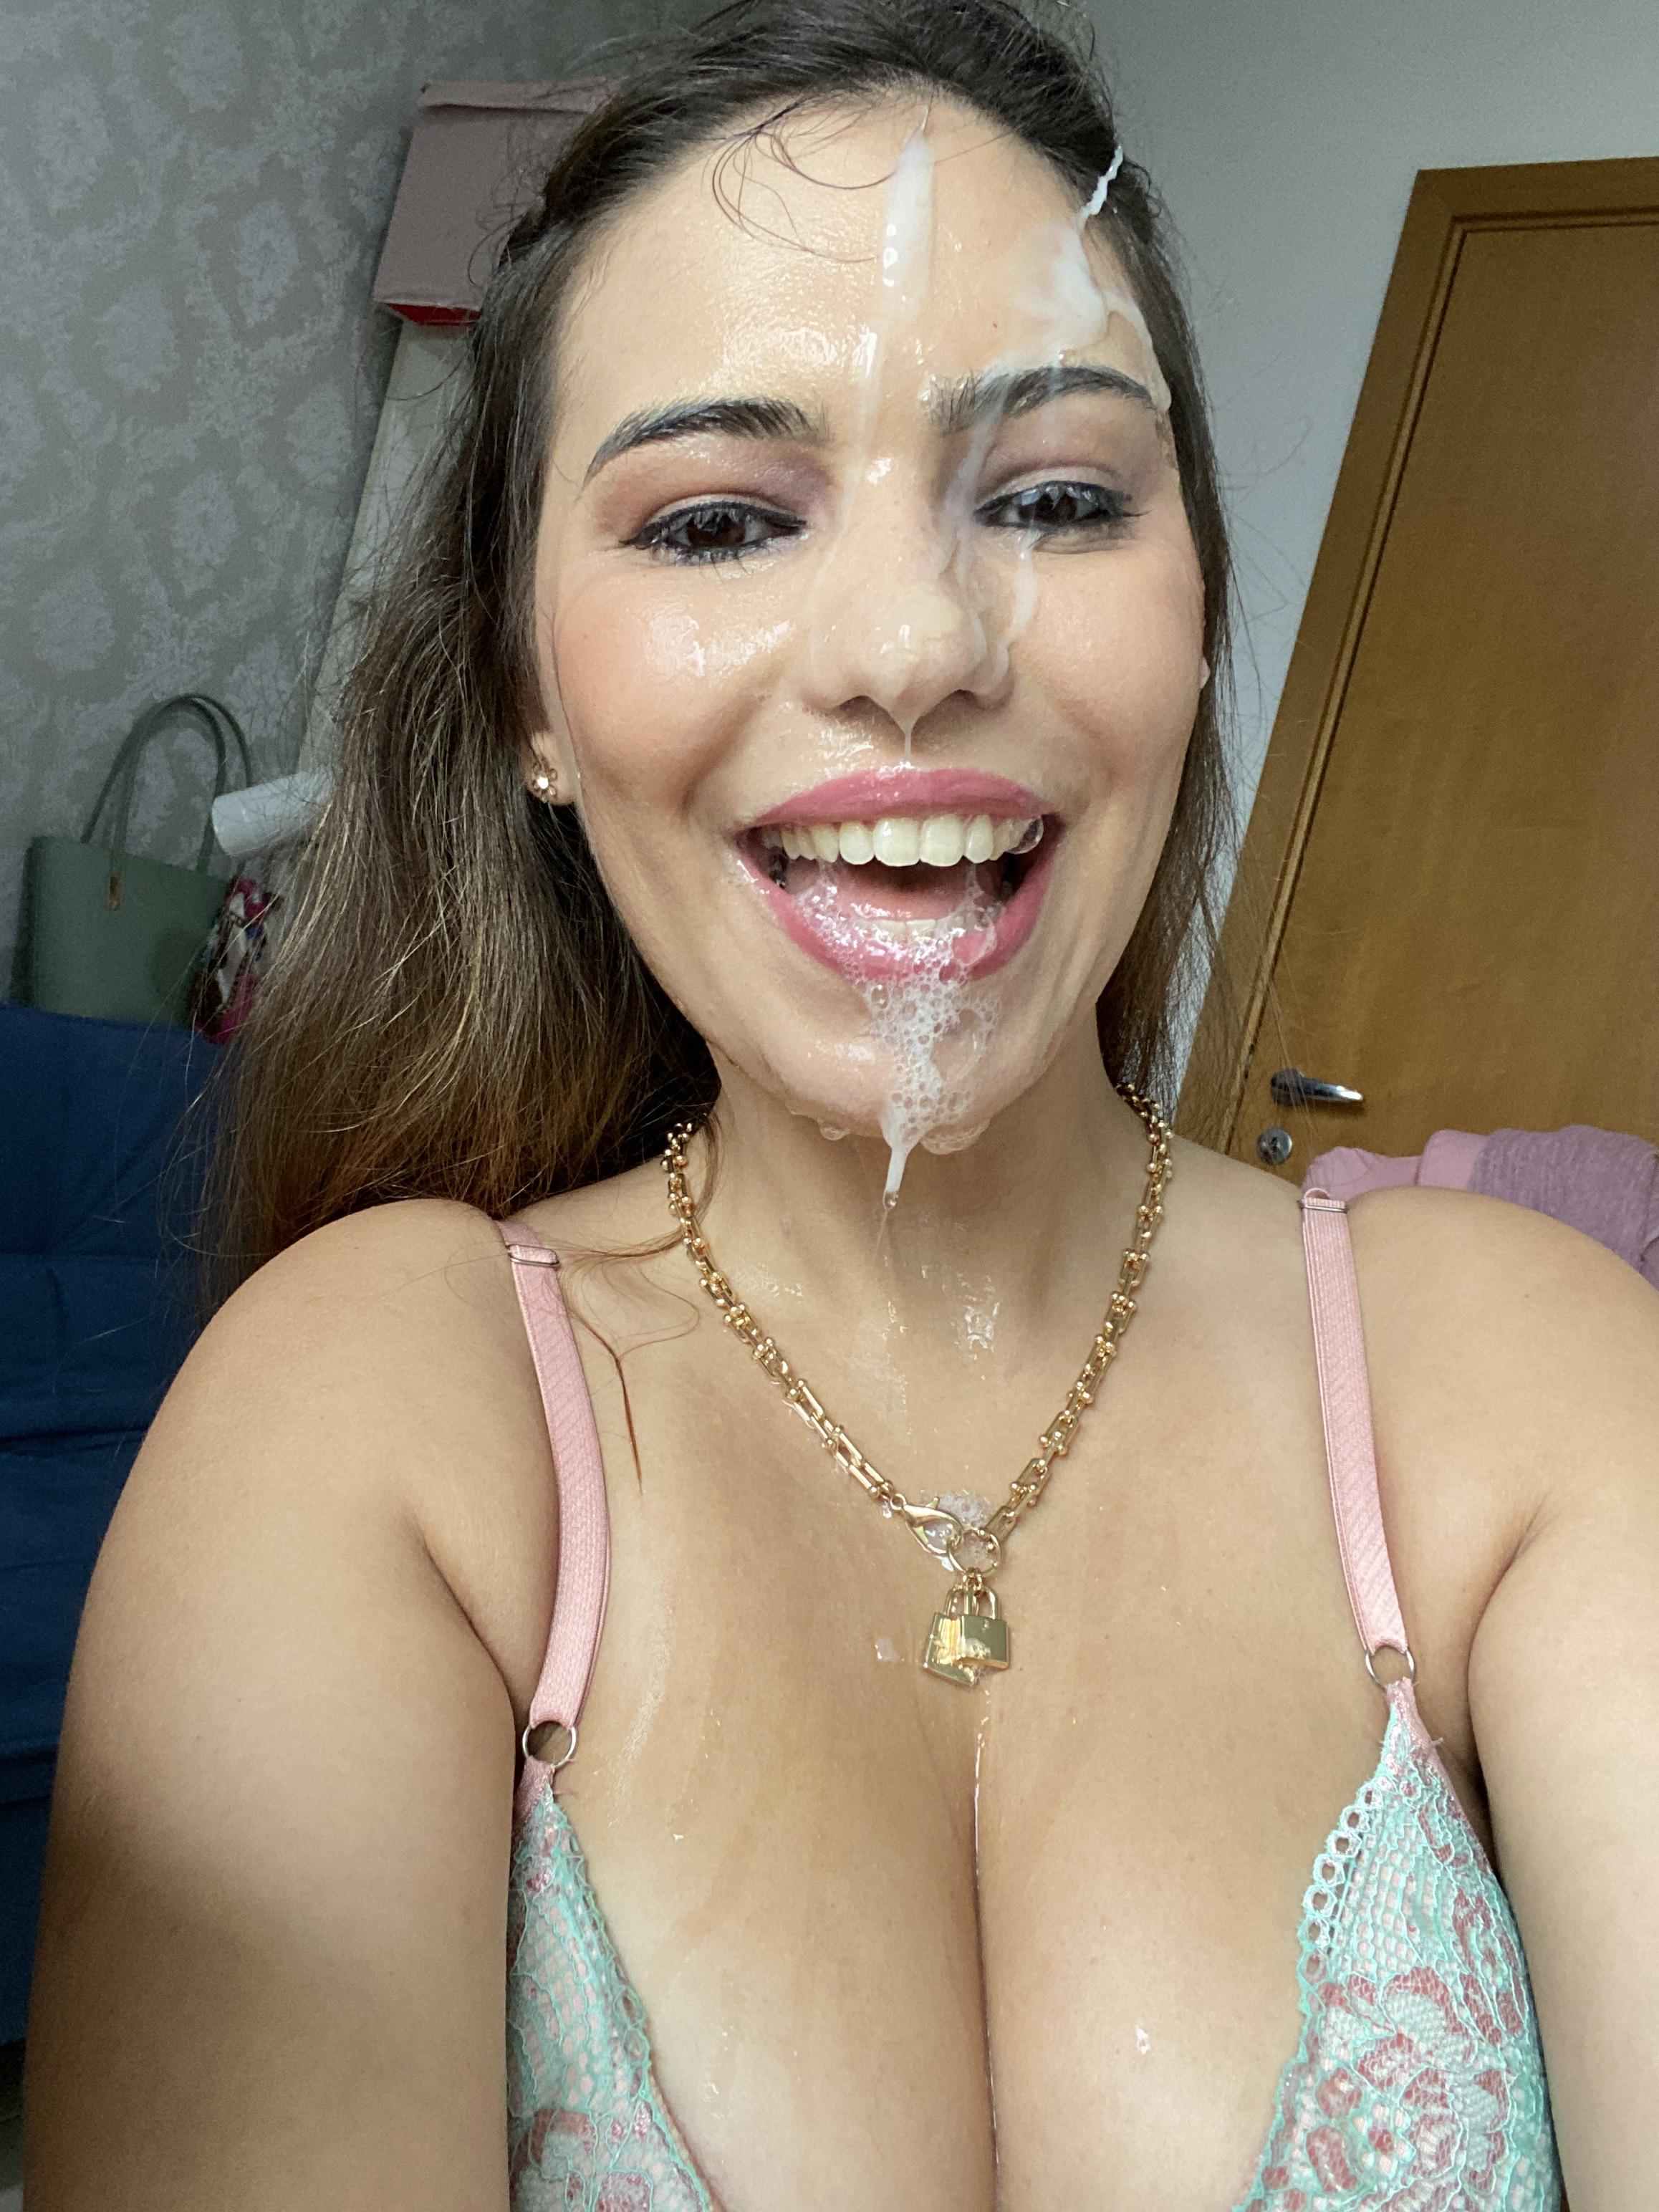 amber nicole mcclain add girls with cum on their face photo